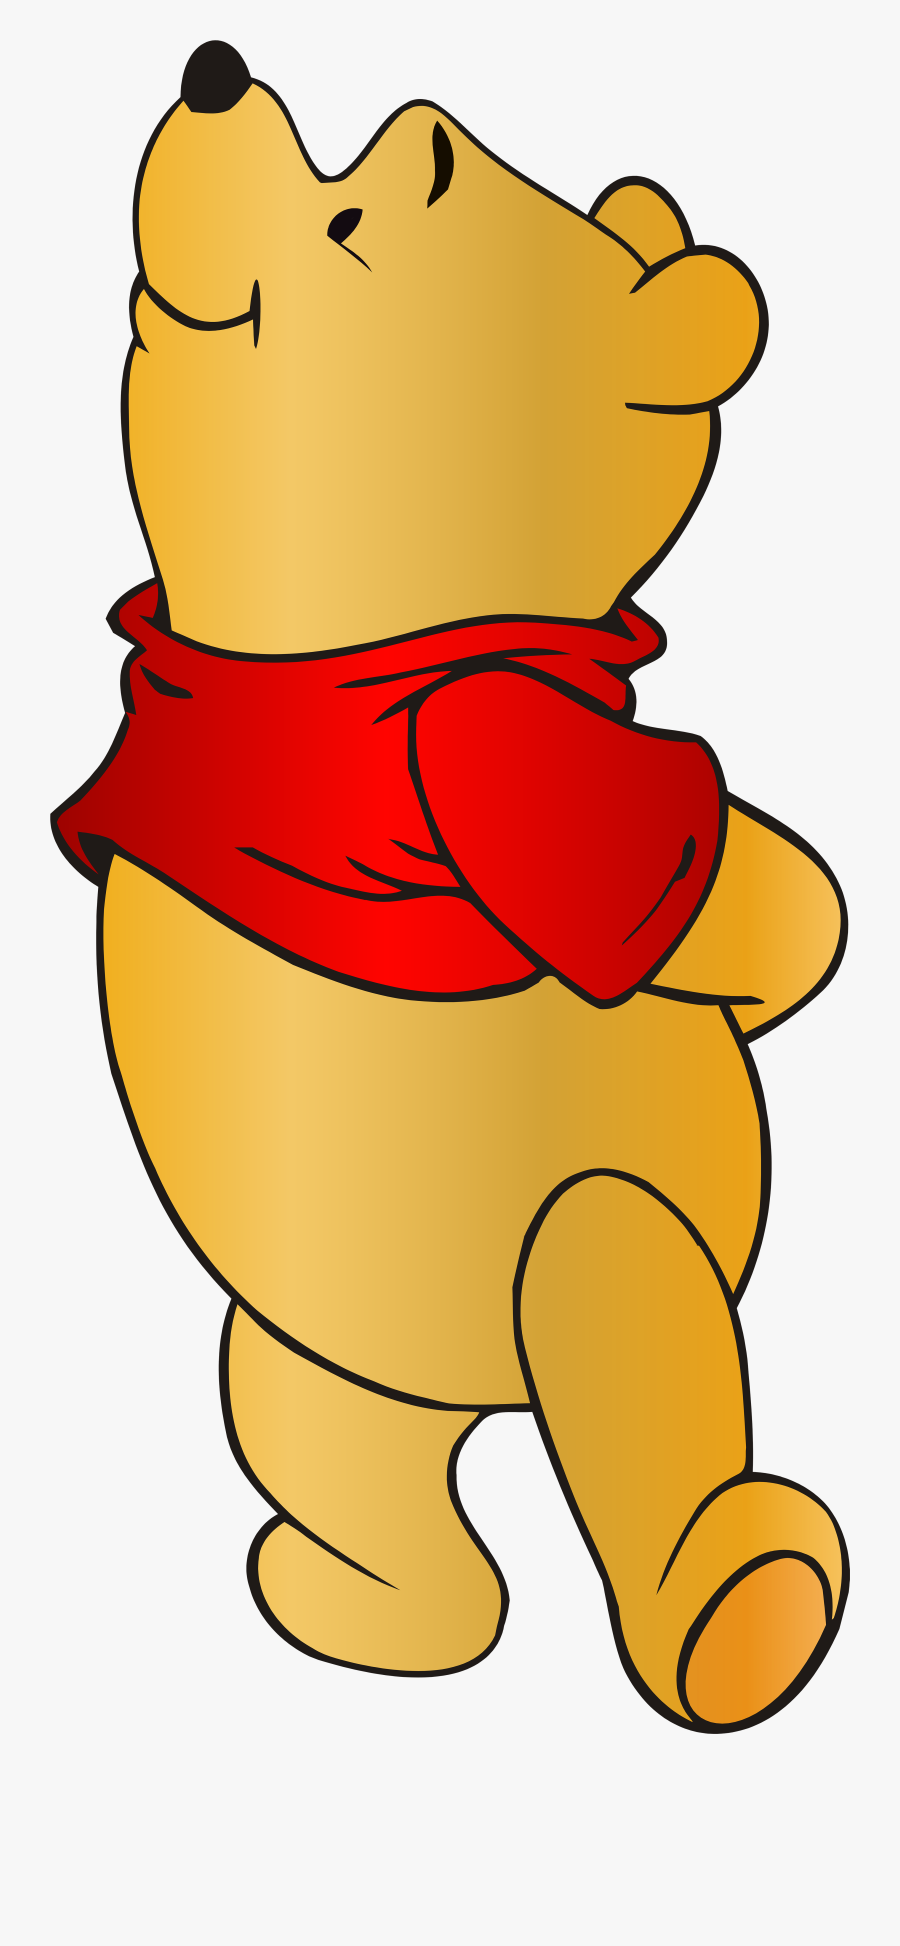 Winnie The Pooh Png Clip Art - Winnie The Pooh Png, Transparent Clipart